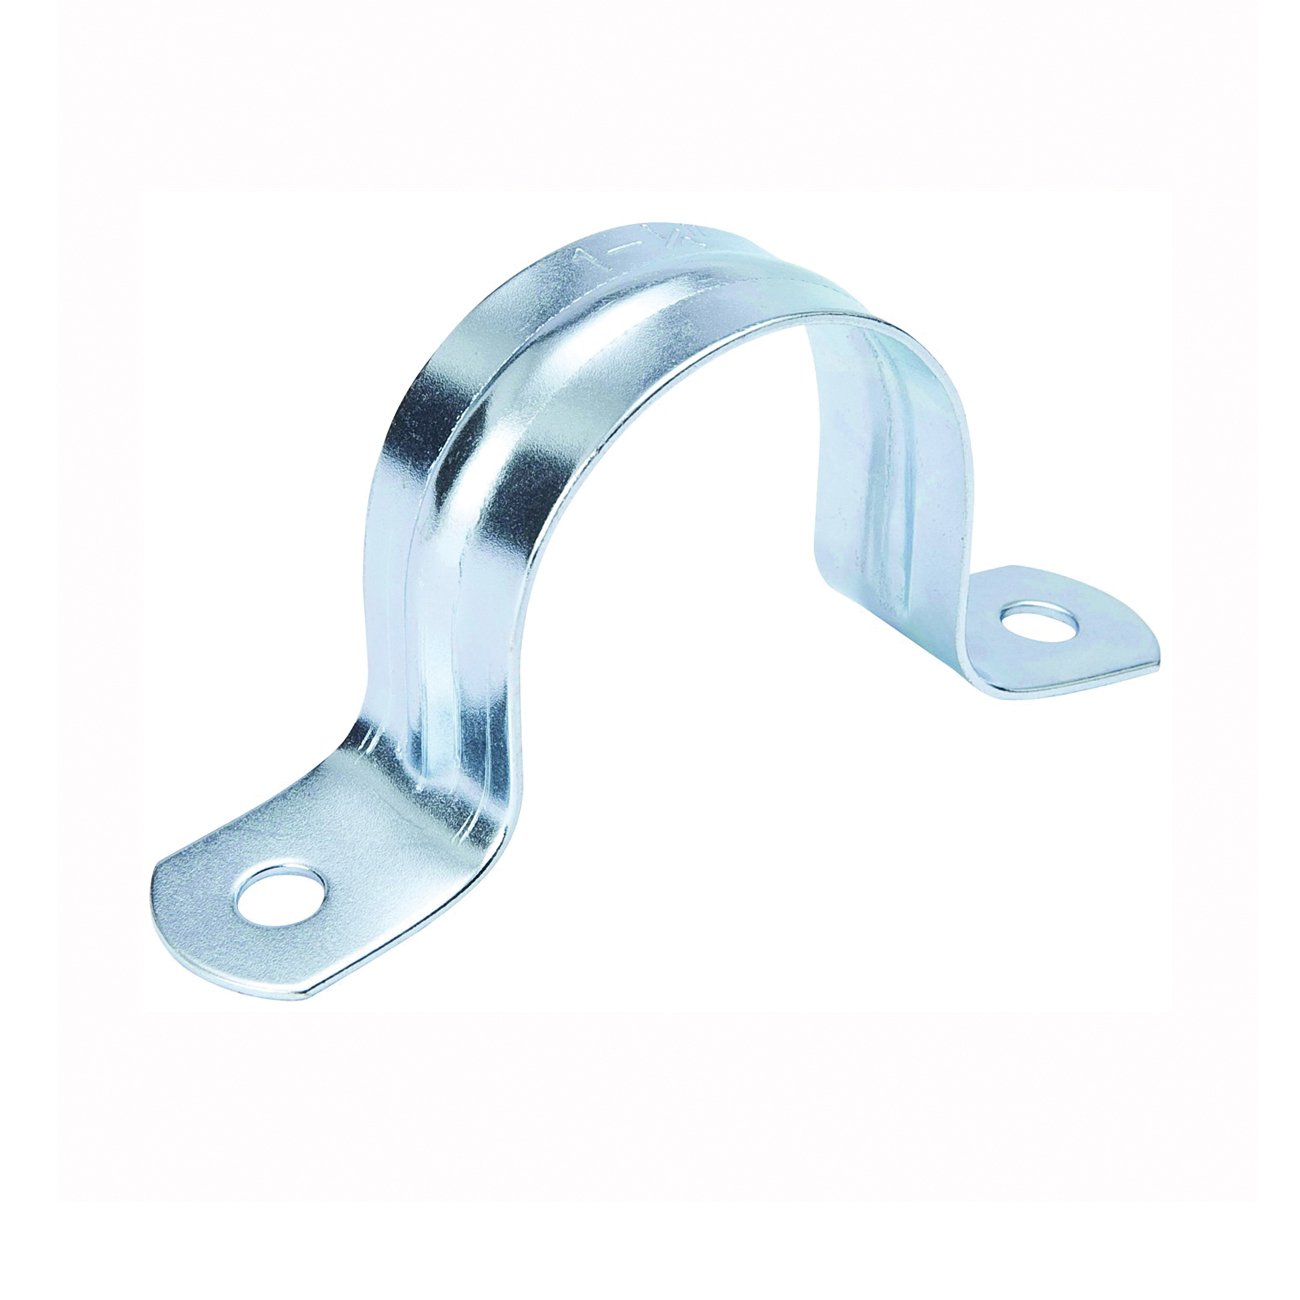 G13-150HC Pipe Strap, 1-1/2 in Opening, Steel